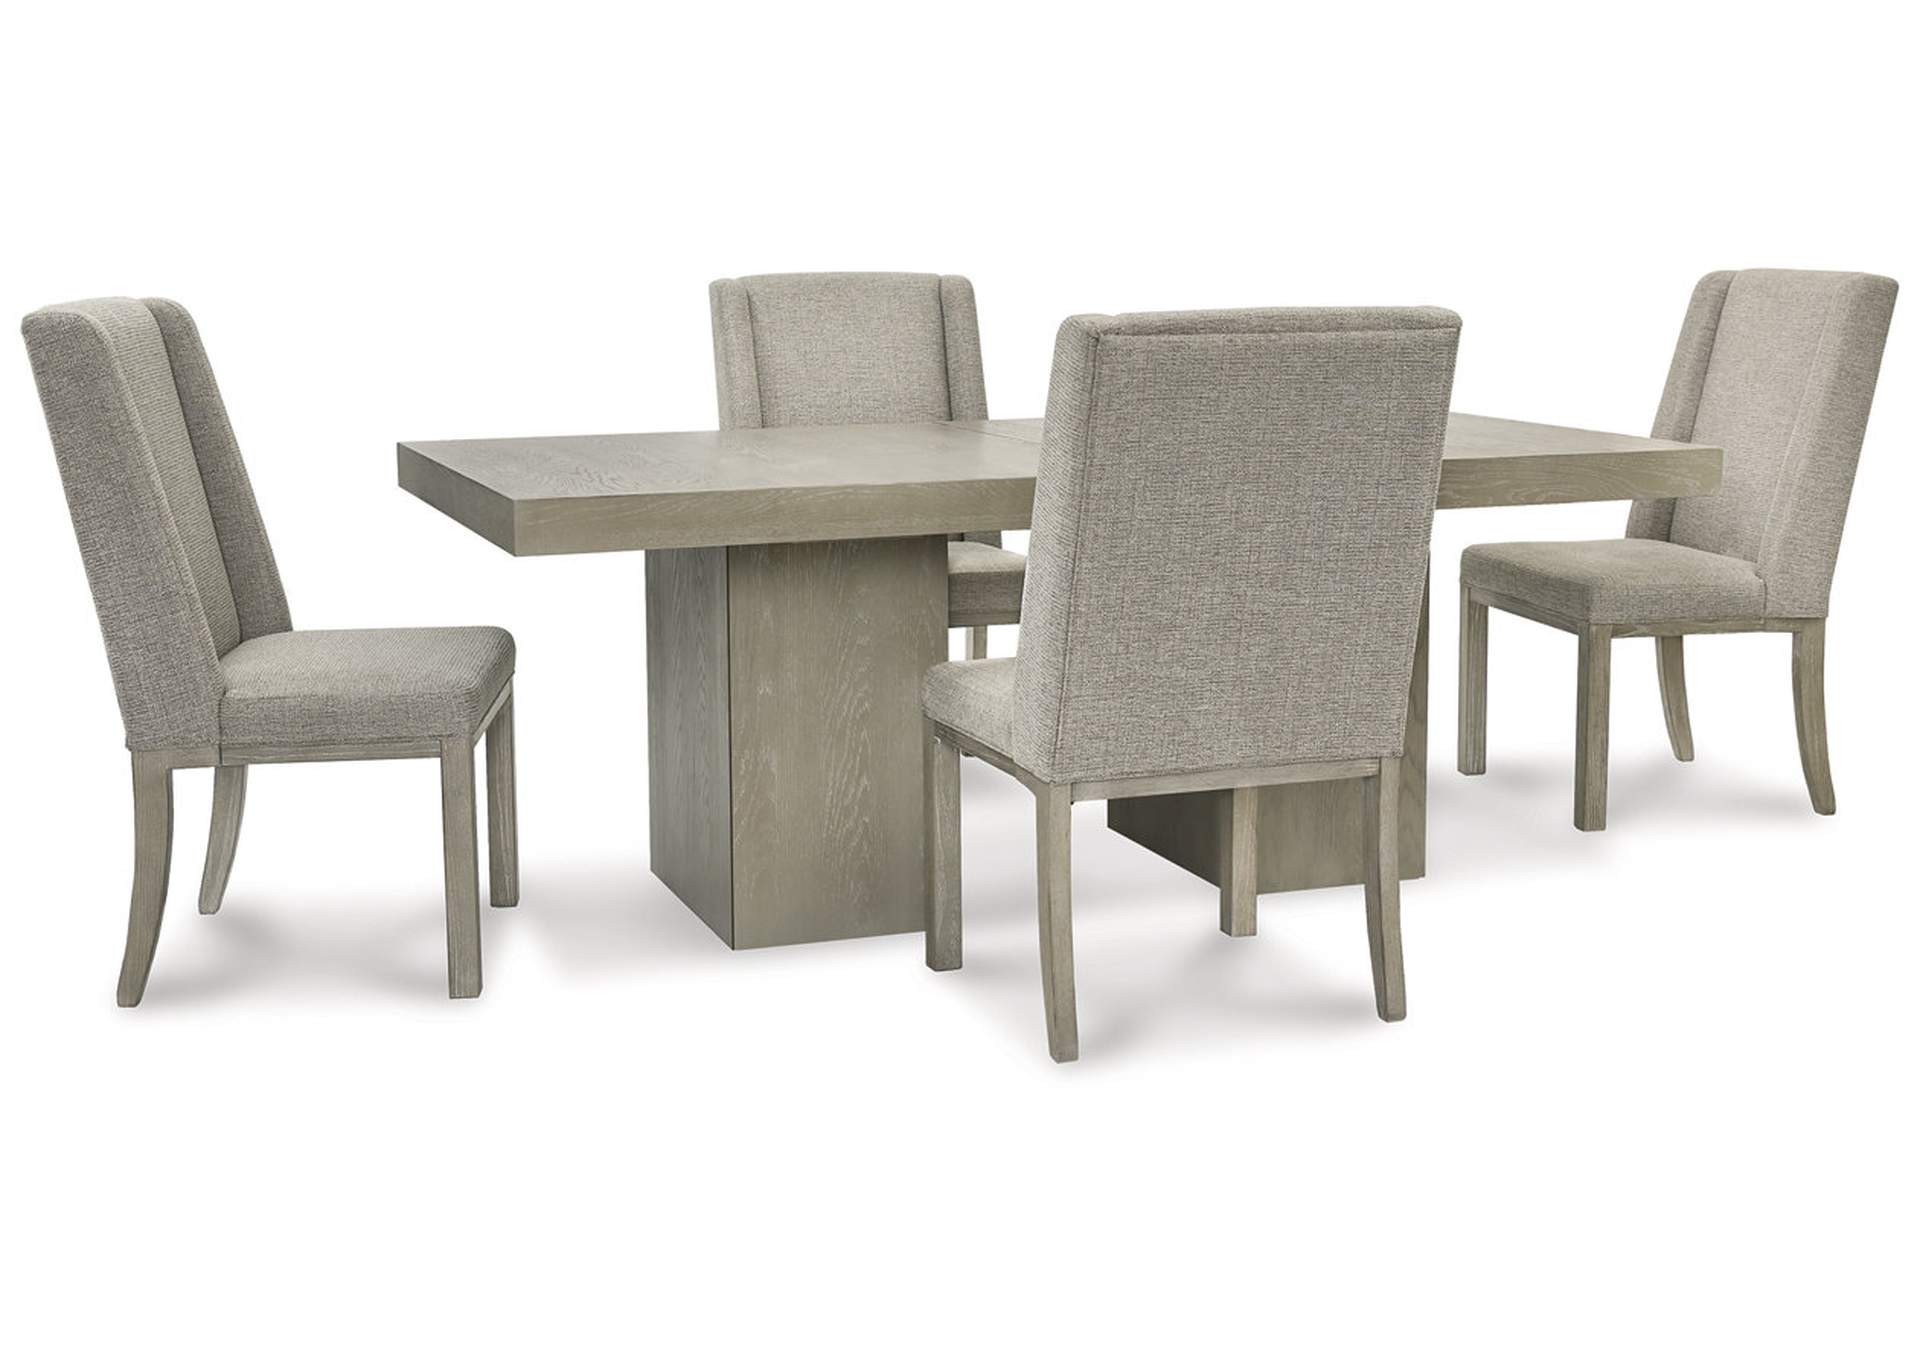 Fawnburg Dining Table and 4 Chairs,Millennium